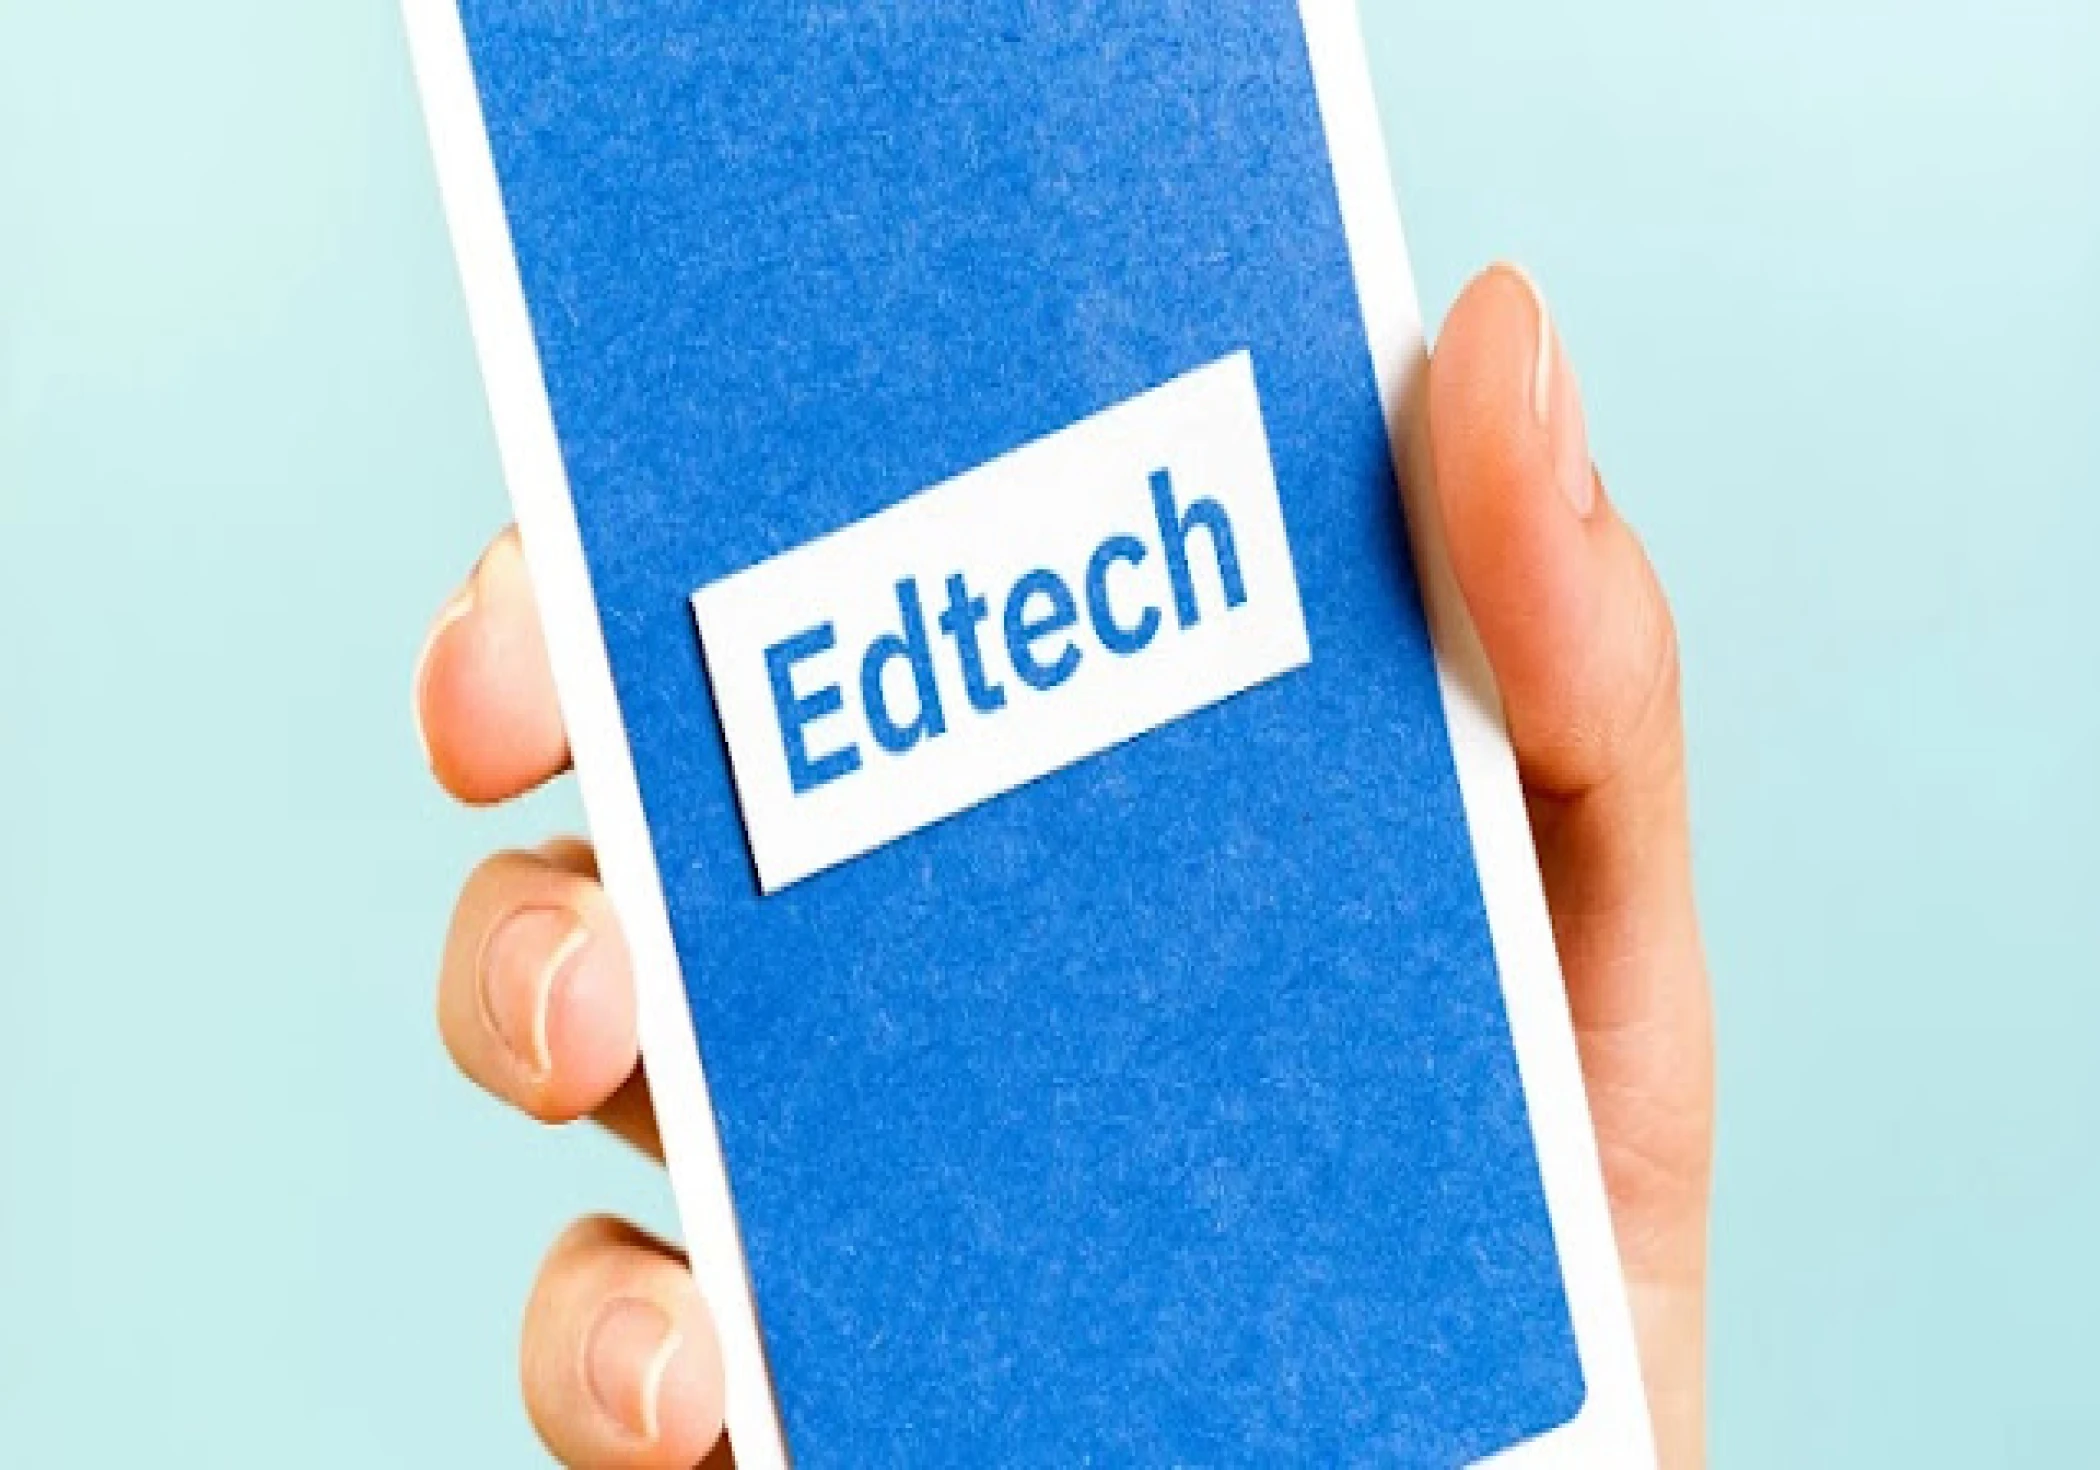 Use of Ed-tech products in Digital Education